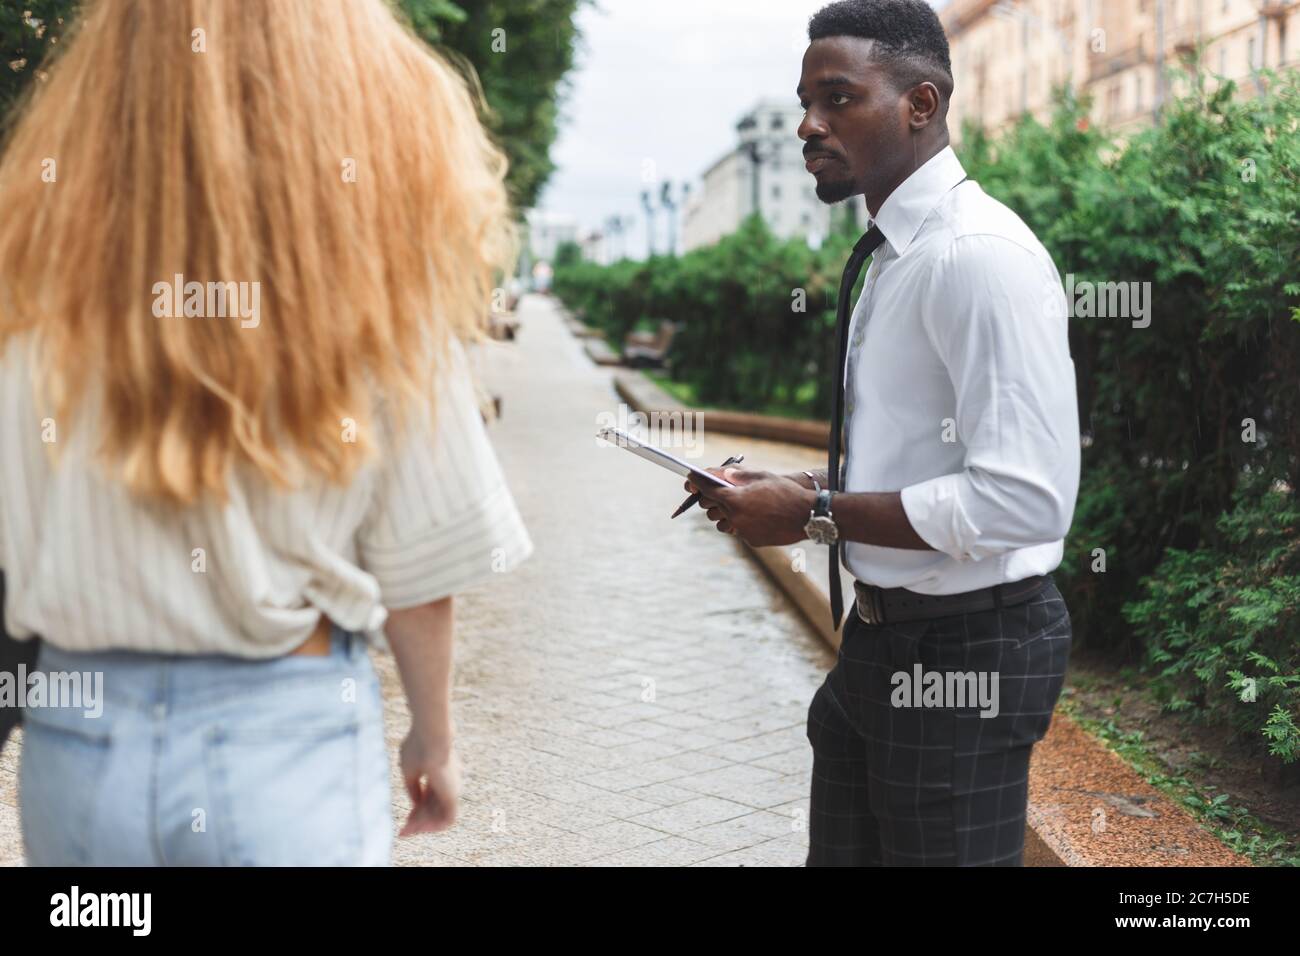 Obsessive black man in business attire interview on the street bothering passersby with questions Stock Photo